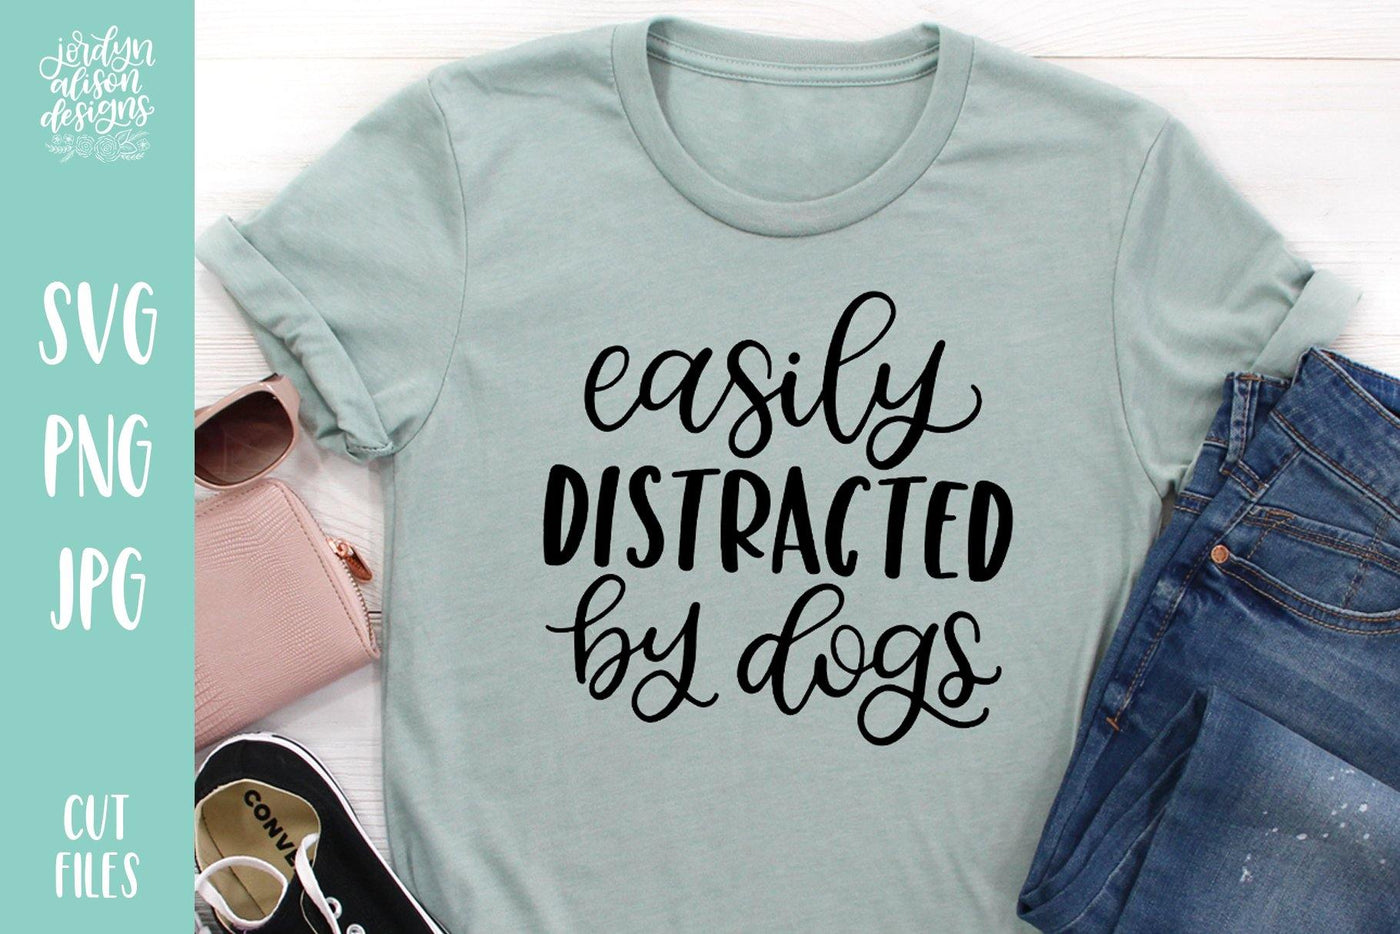 Cut File | Easily Distracted By Dogs - JordynAlisonDesigns